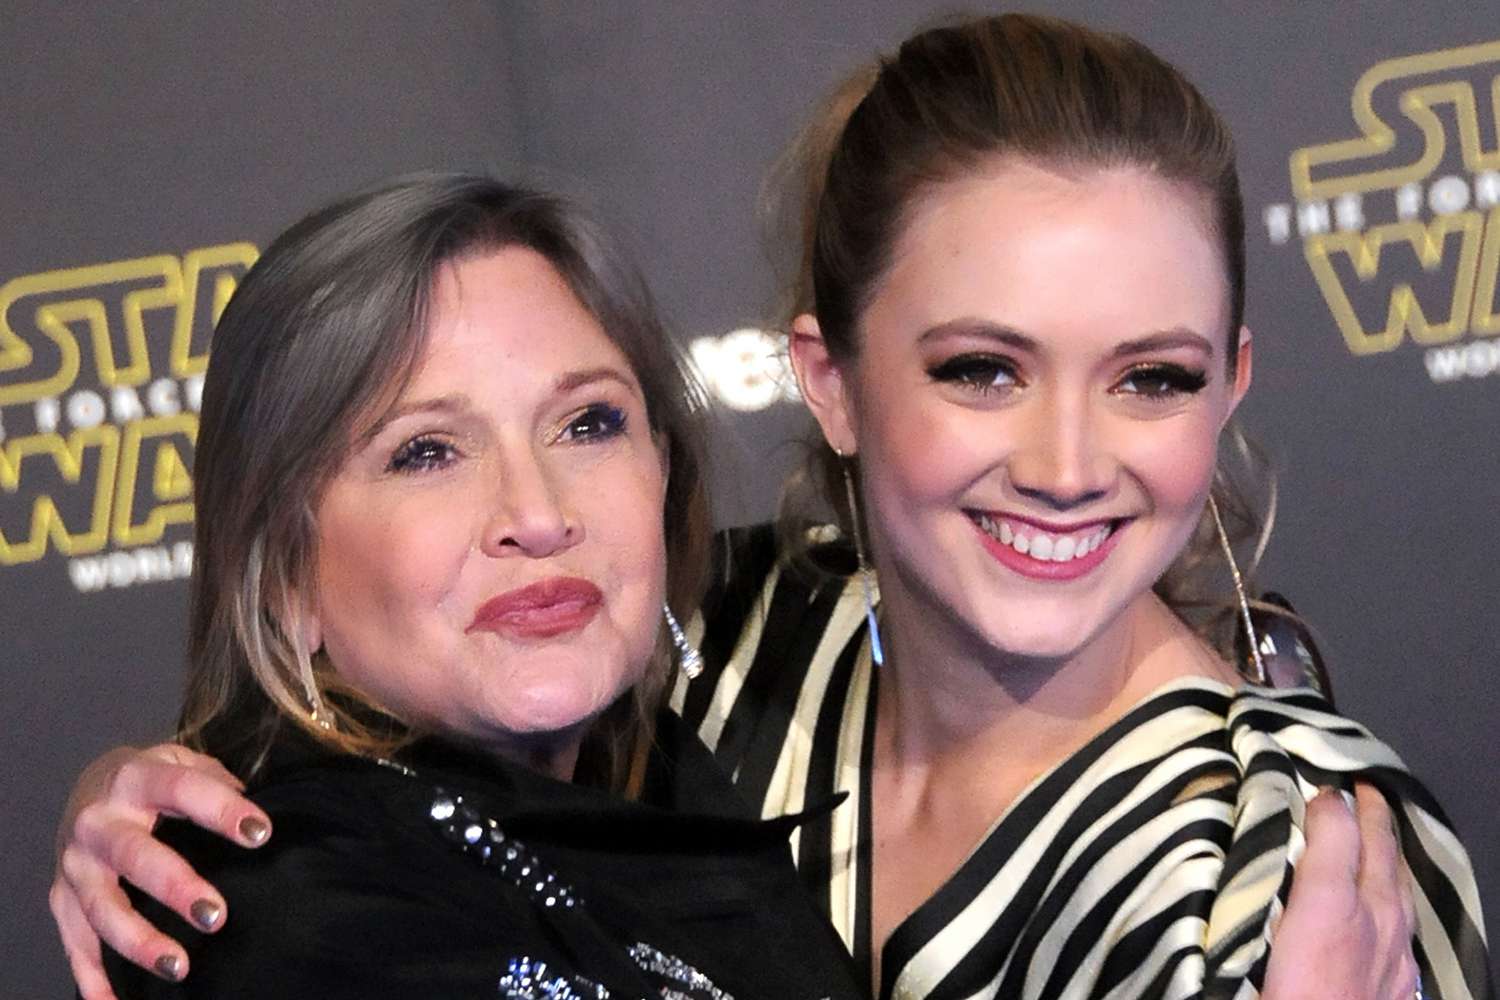 Actress Carrie Fisher and daughter actress Billie Lourd attend the Premiere of Walt Disney Pictures and Lucasfilm's 'Star Wars: The Force Awakens' on December 14, 2015